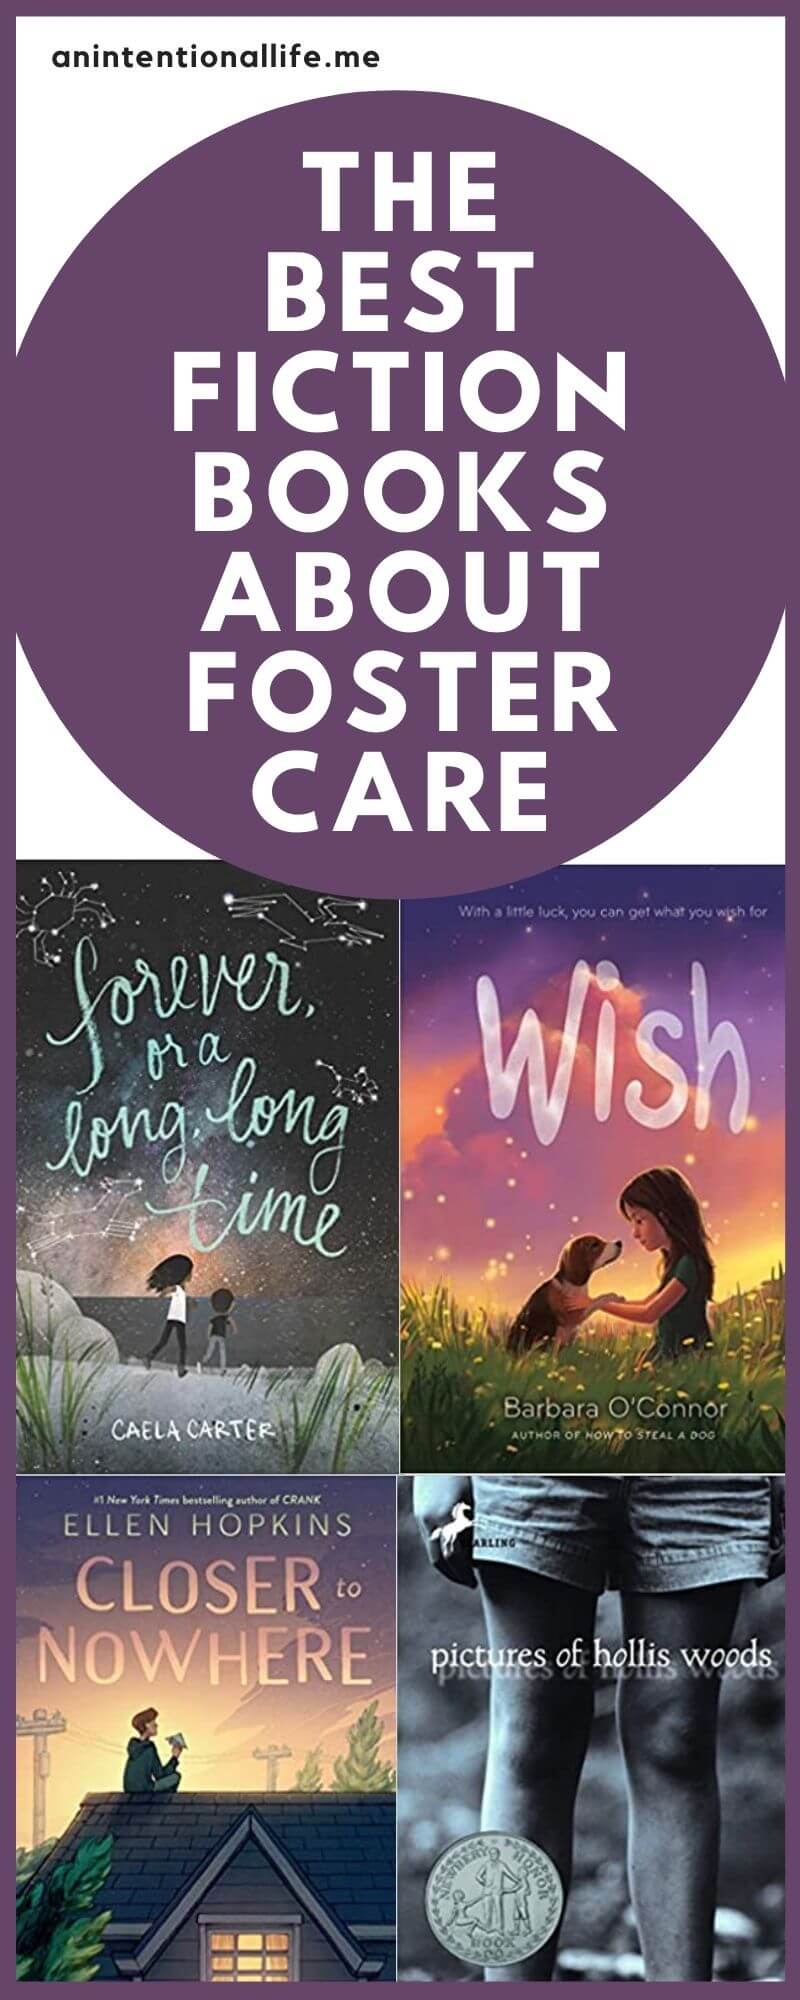 The Best Fiction Books About Foster Care - middle grade foster care books